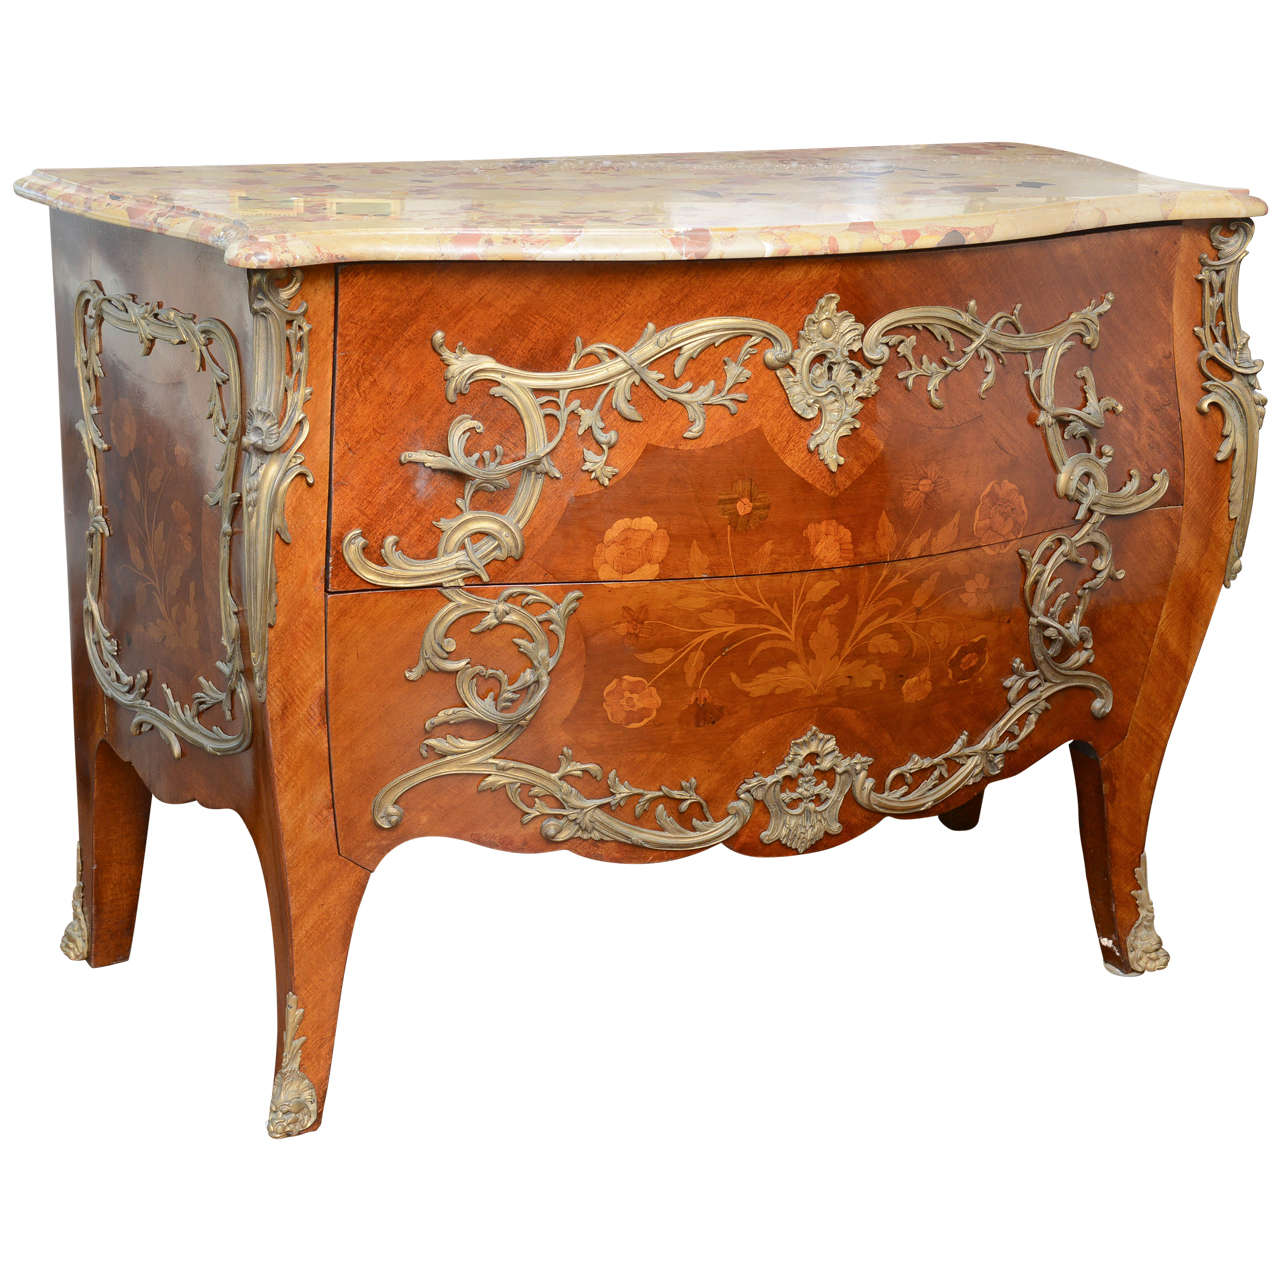 French Louis XV Style Commode with Marquetry and Ormolu, circa 1900